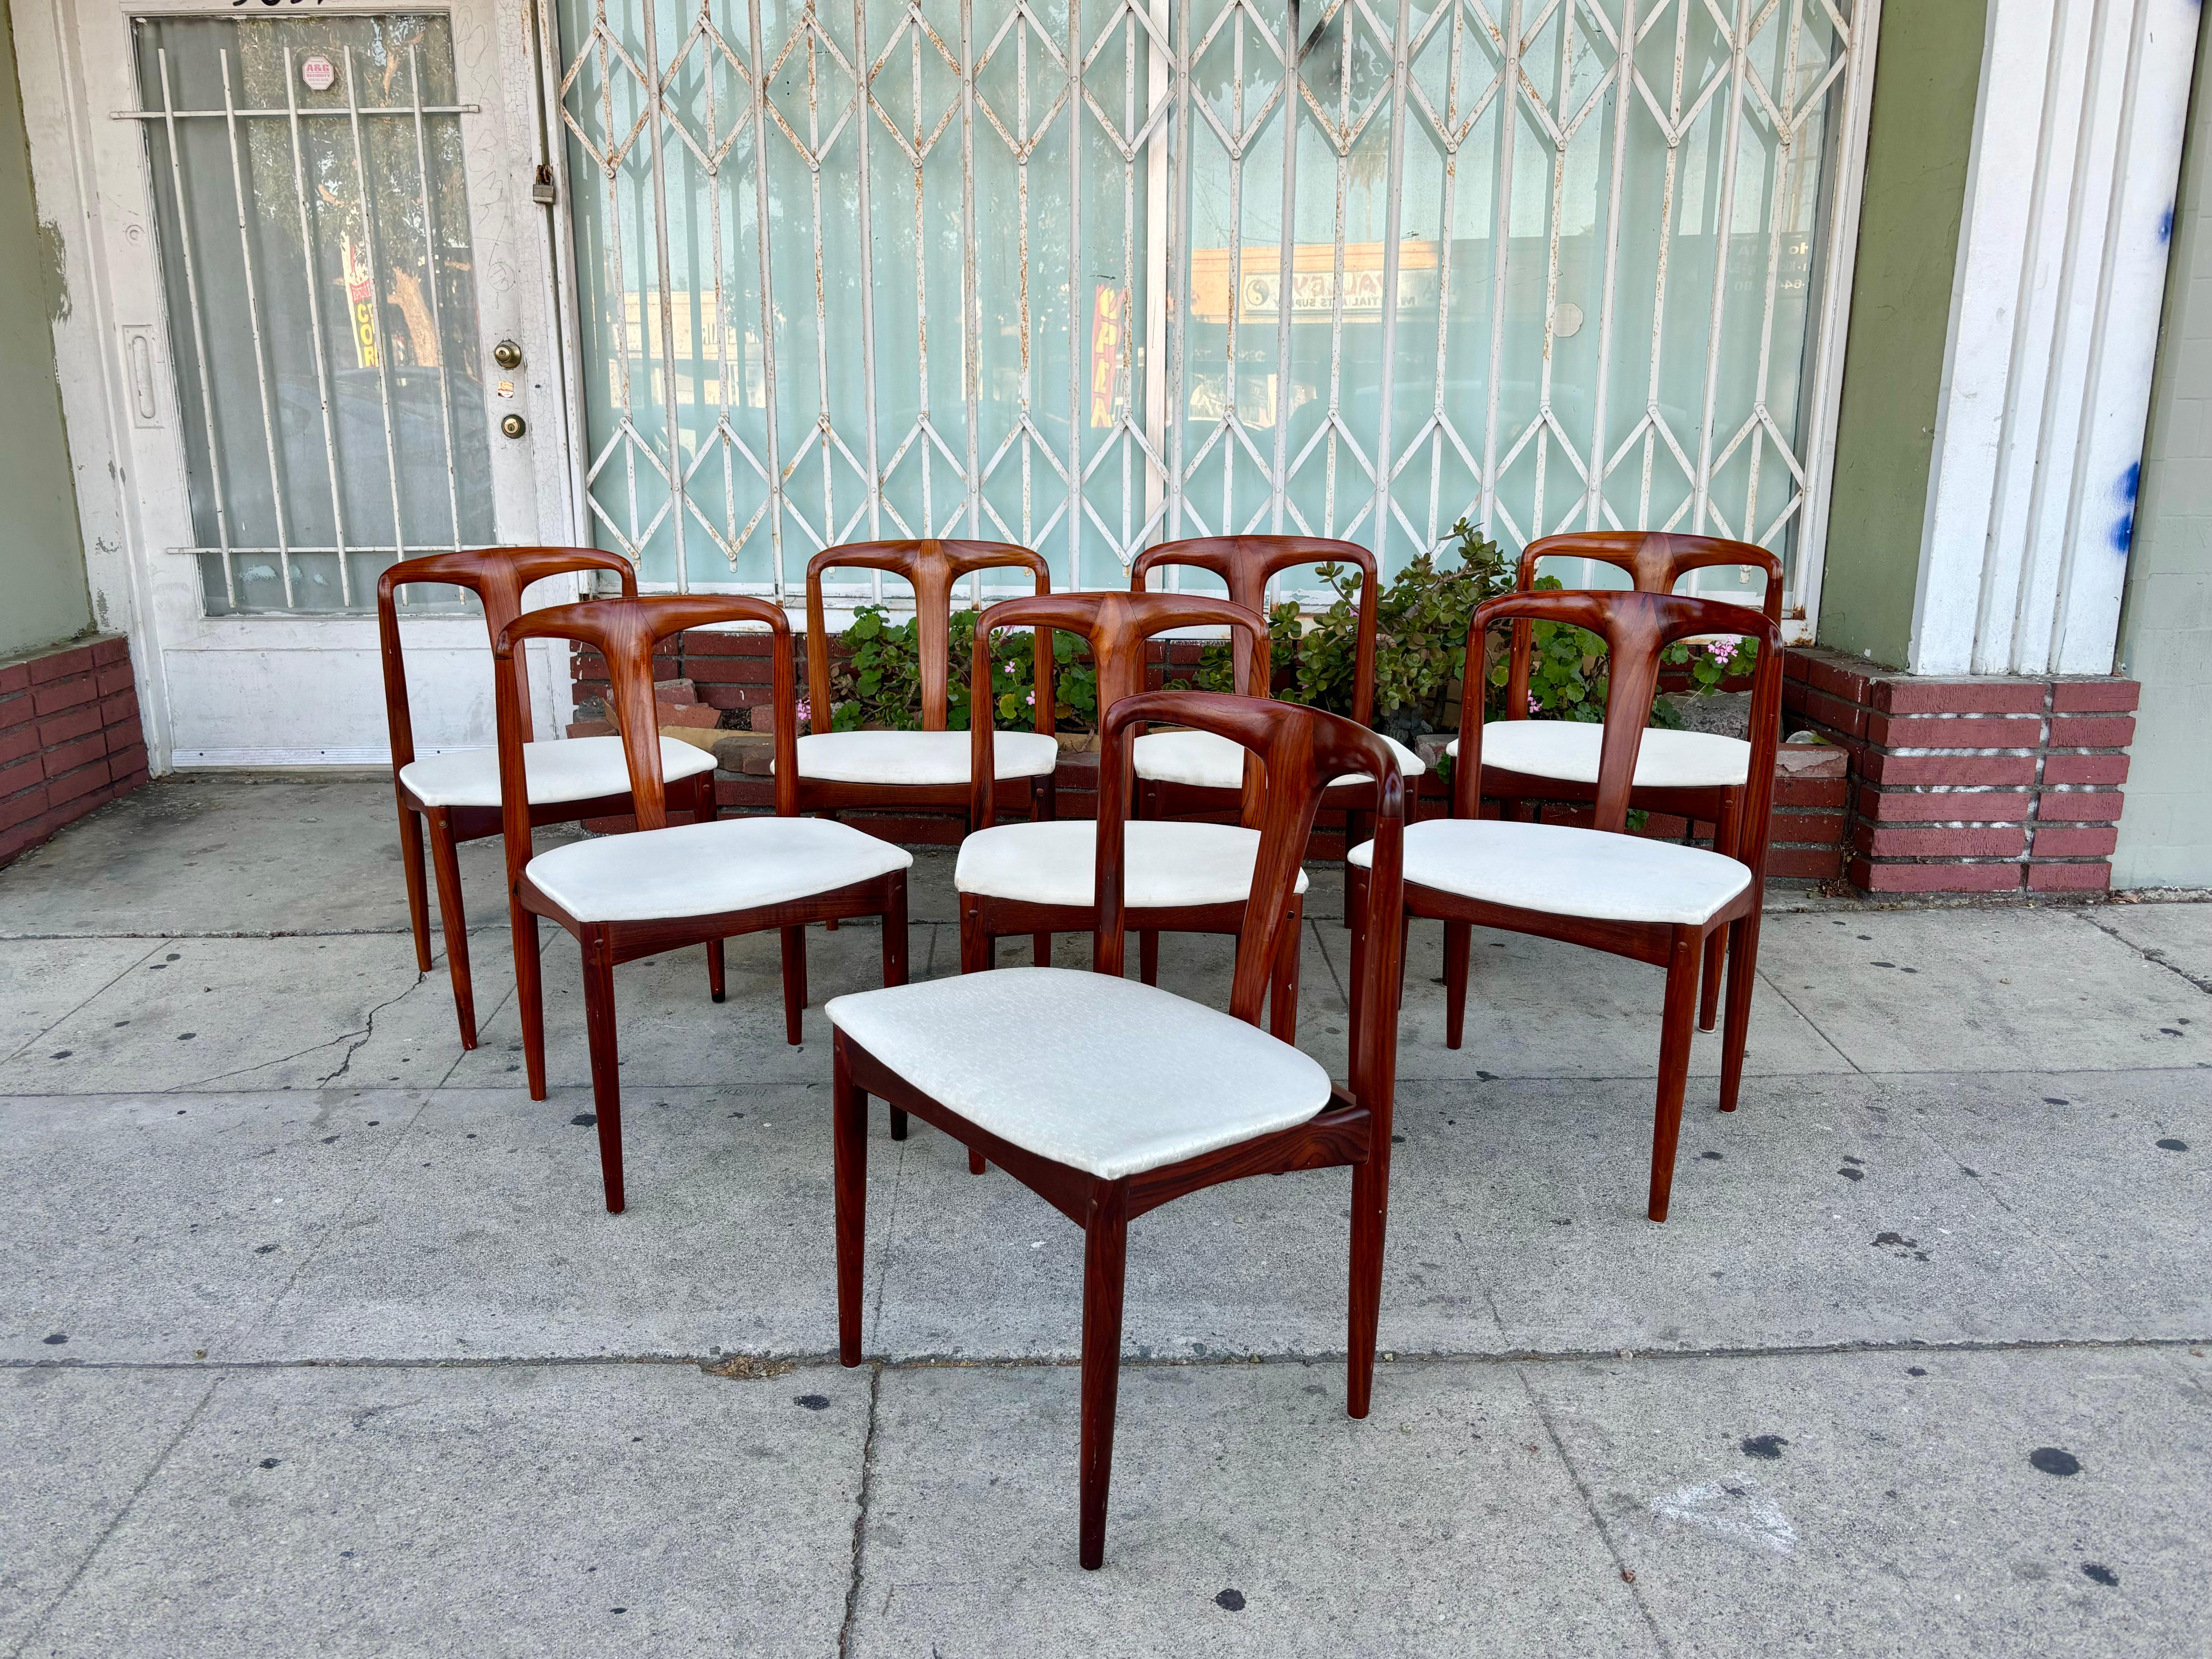 Danish modern rosewood dining chairs designed by Johannes Andersen and manufactured by Uldum Møbelfabrik in Denmark circa 1960s. These dining chairs feature a white fabric upholstery that sits on top of an amazing rosewood frame. What sets these